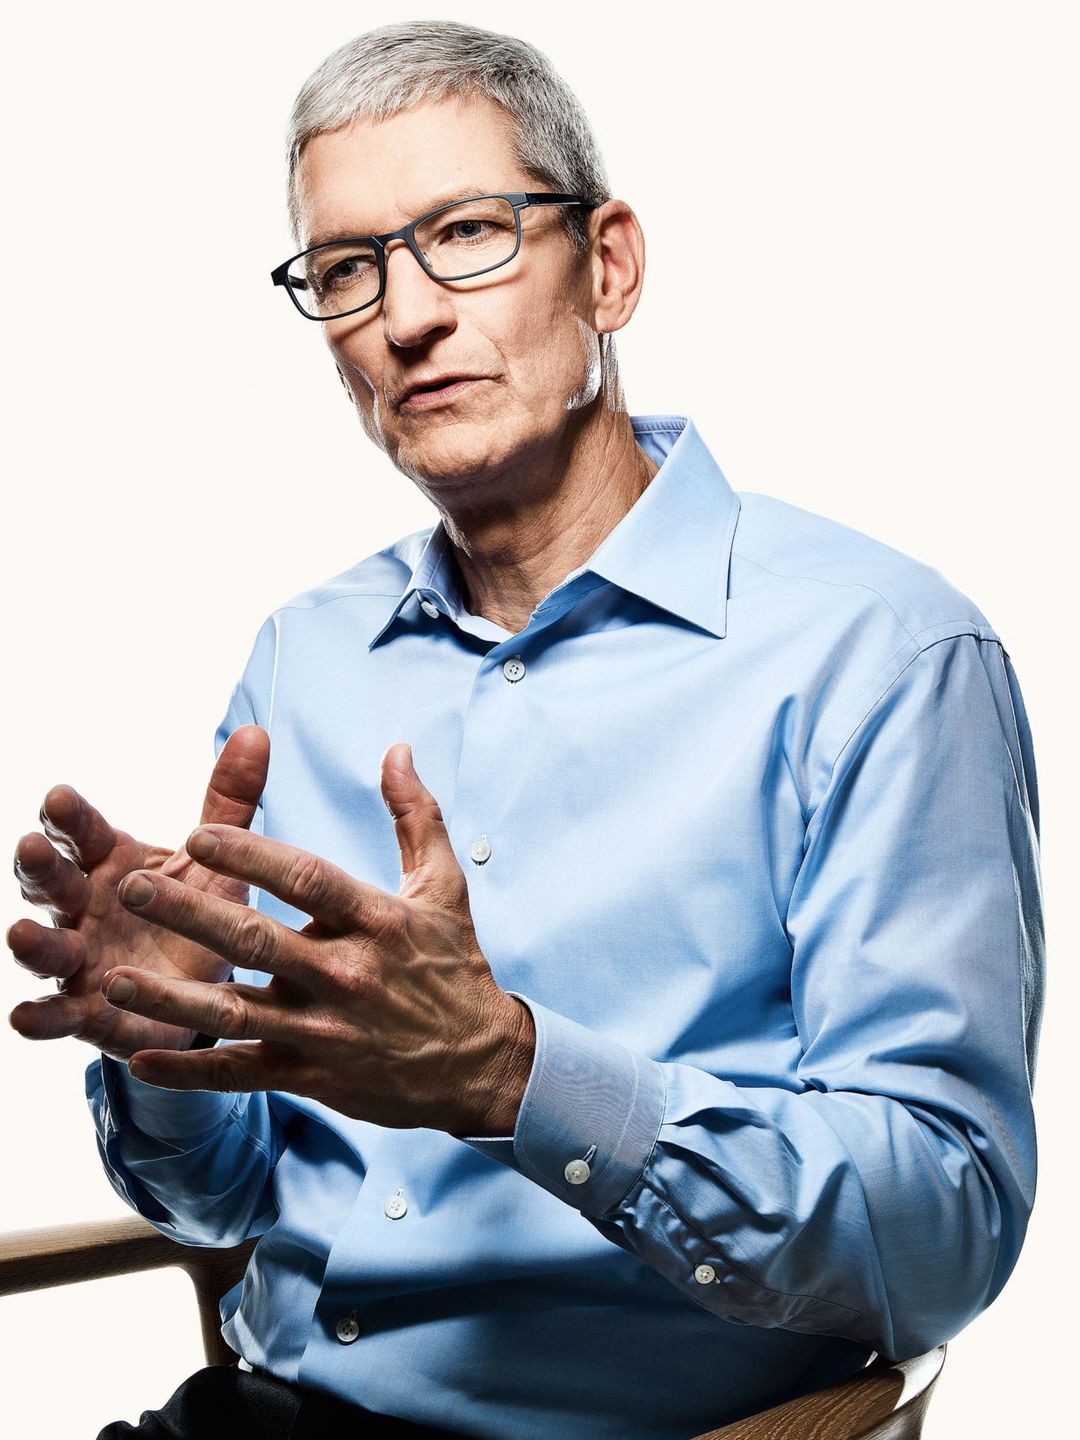 Tim Cook early childhood